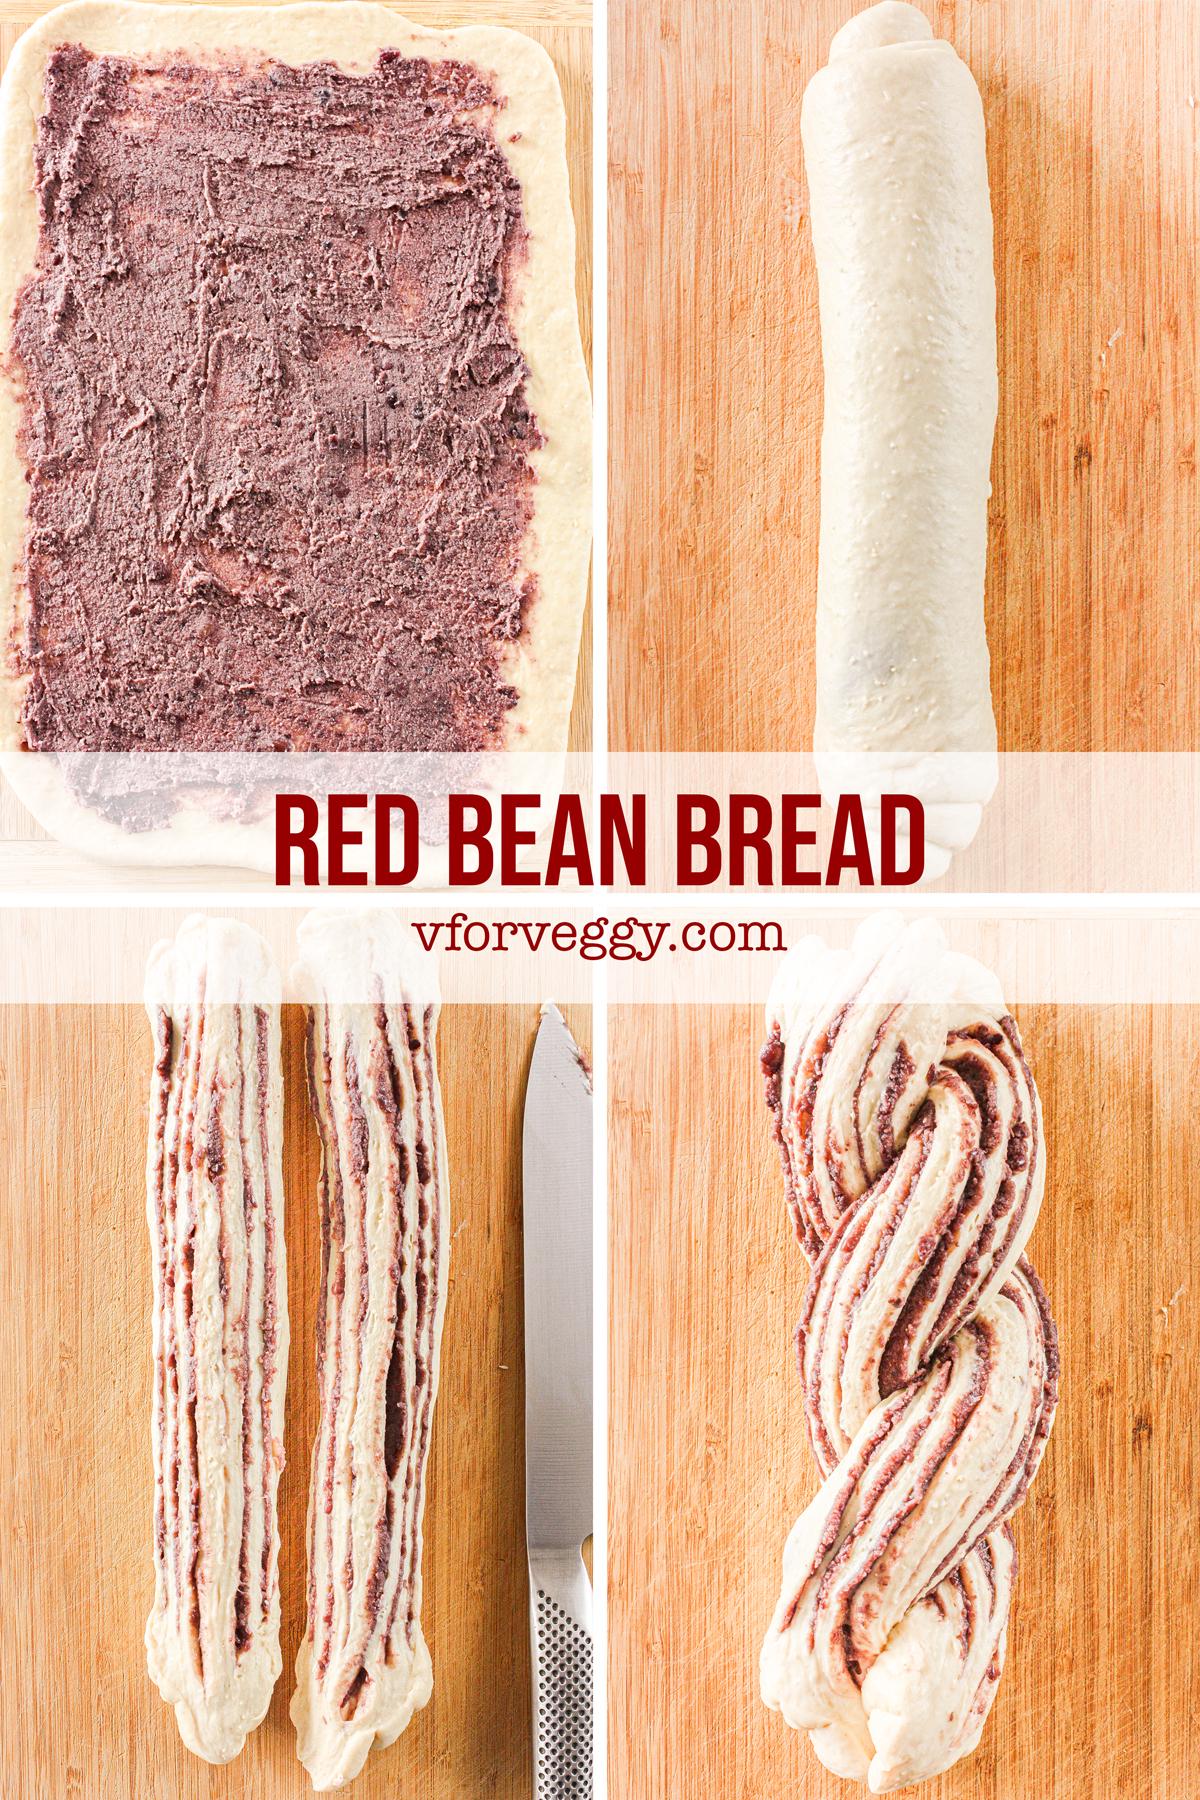 Step-by-step to make a read bean bread loaf.